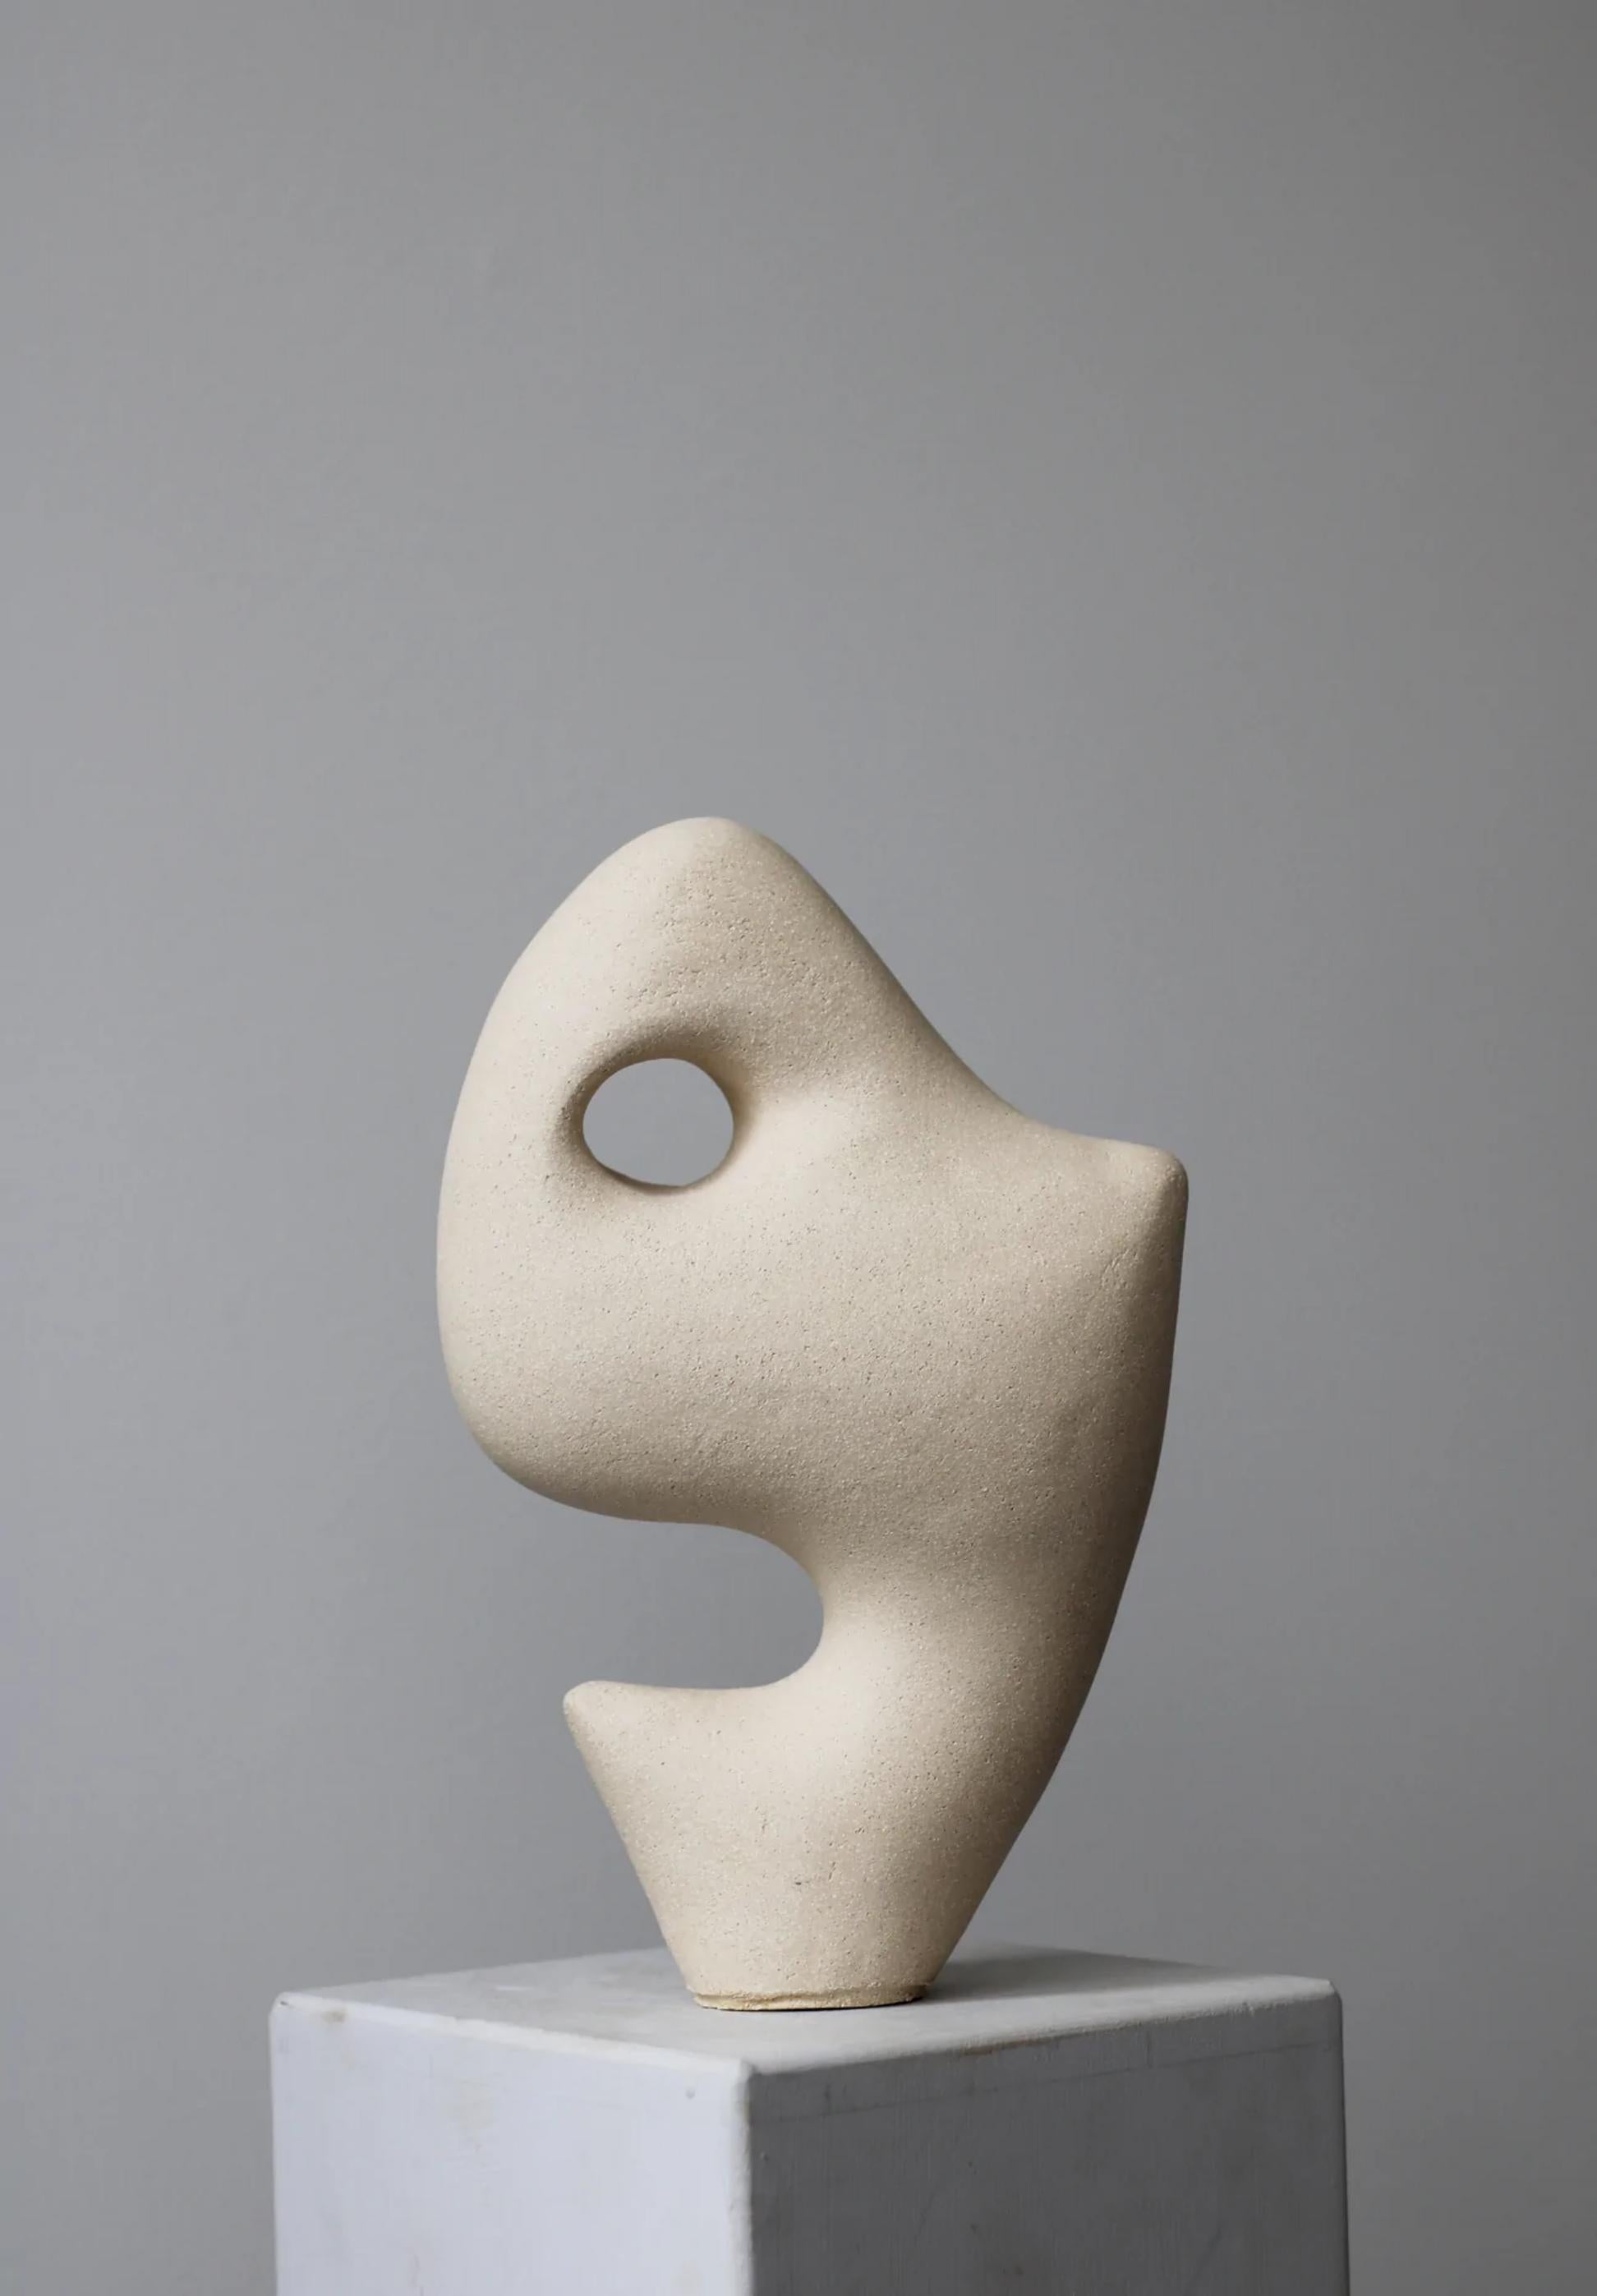 Large Pleomorph 50B sculpture by Abid Javed
Dimensions: W 25 x D 10 x 50 cm (Dimensions are variable)
Materials: stoneware.
Multiple clay color and size options.

Handmade stoneware Sculpture.
Hollow form, hand coiled and sculptured, with a